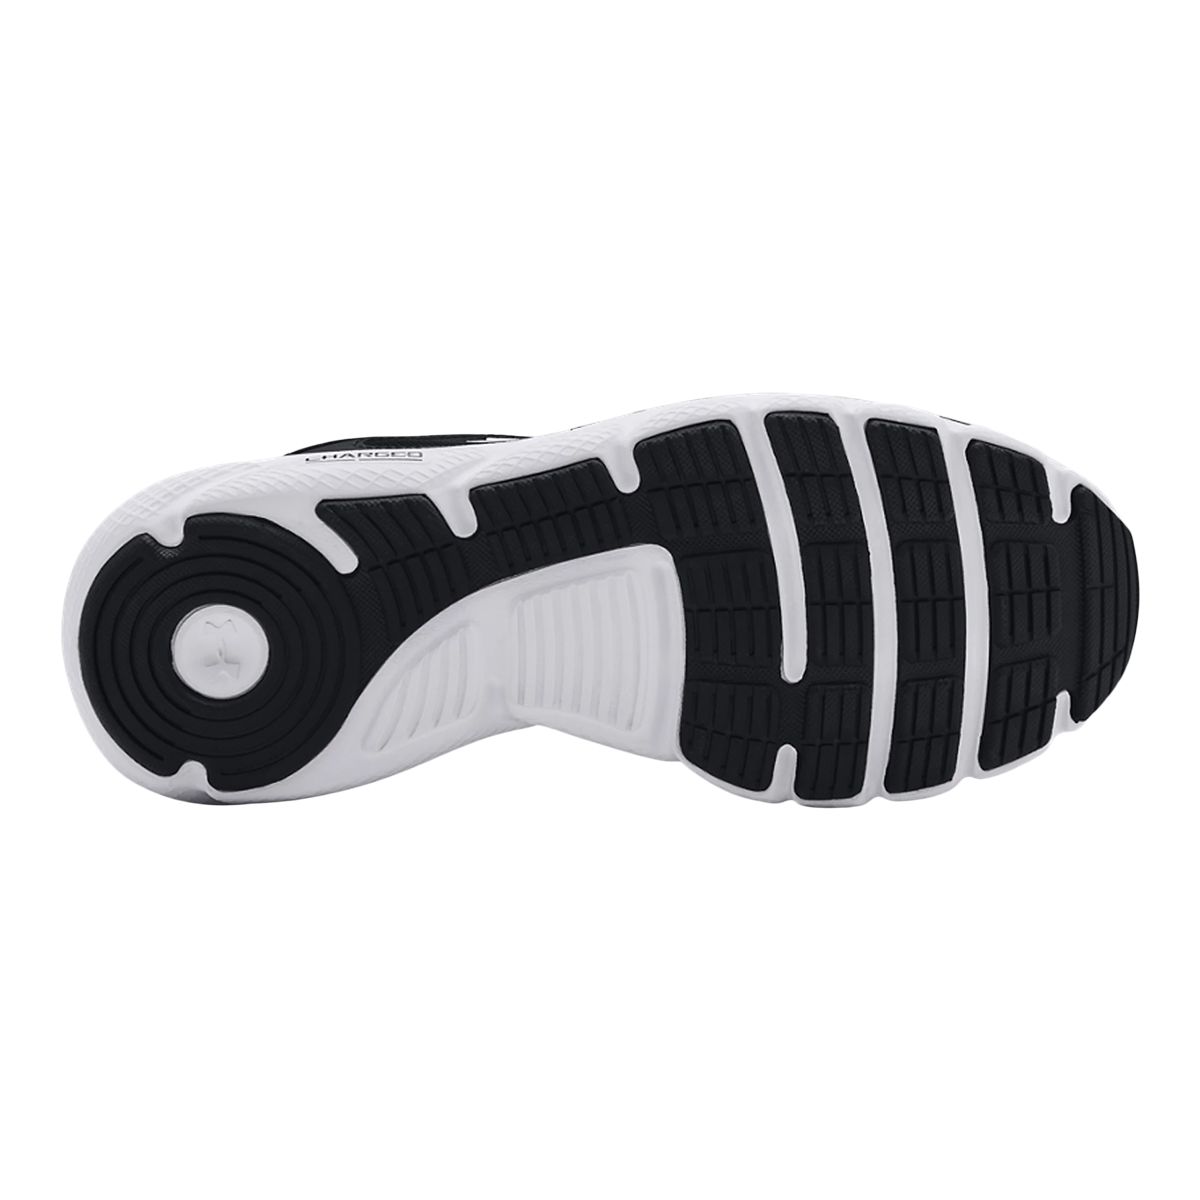 https://media-www.atmosphere.ca/product/div-05-footwear/dpt-80-footwear/sdpt-01-mens/333334098/under-armour-charged-assert-9-black-whiteblack-white-7--a3d1f0da-c19c-4574-9f34-3a1ff7f0615a-jpgrendition.jpg?imdensity=1&imwidth=1244&impolicy=mZoom